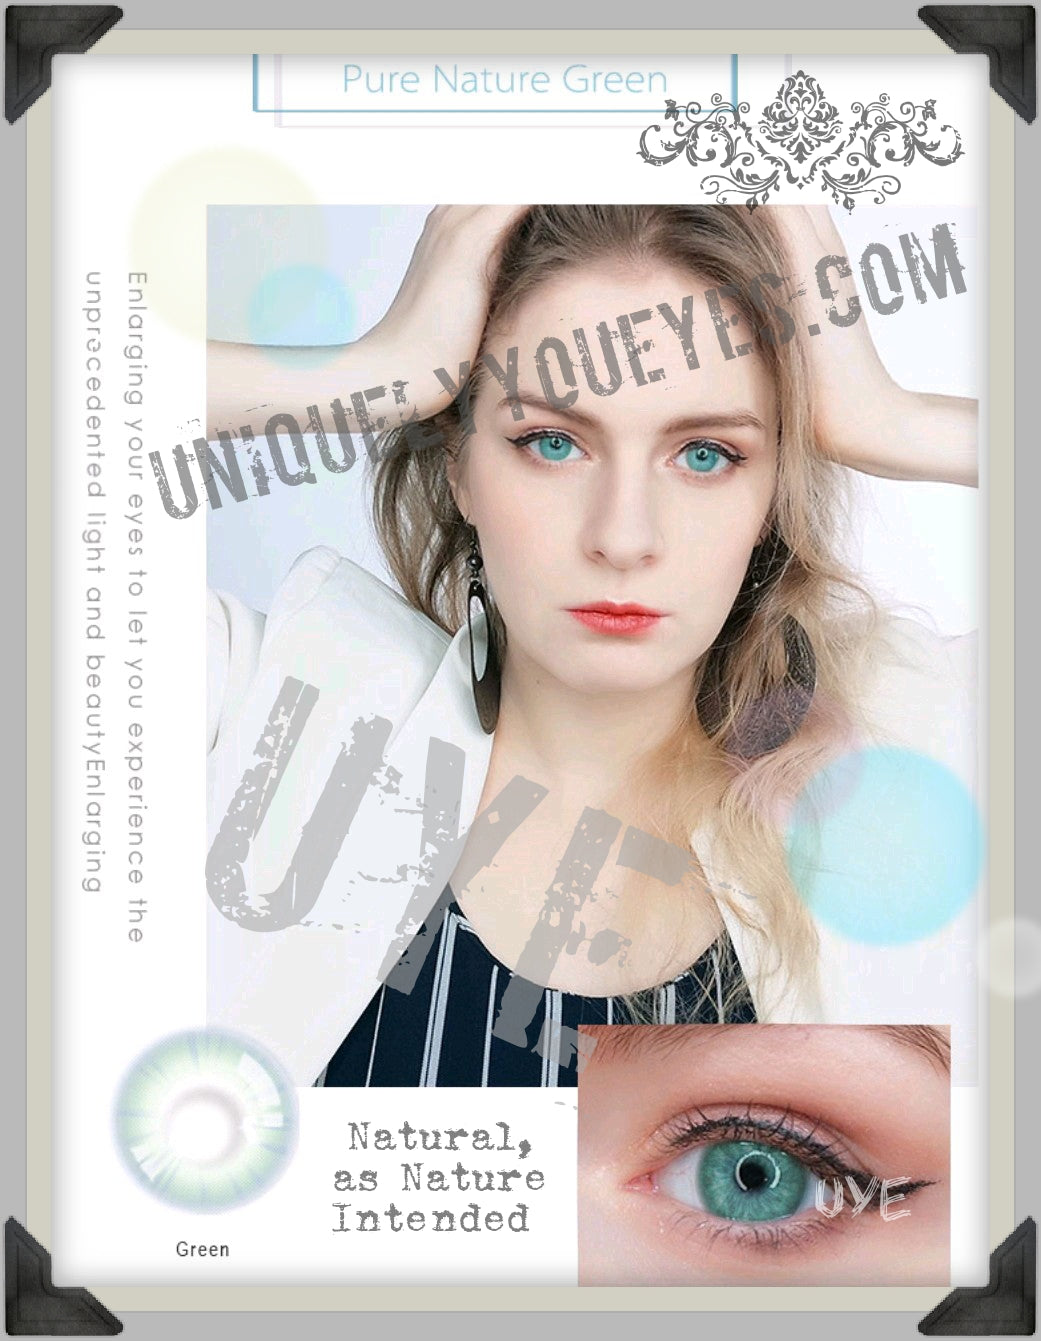 Minty Green PURE NATURE colored contacts-Pure Nature-UNIQUELY-YOU-EYES